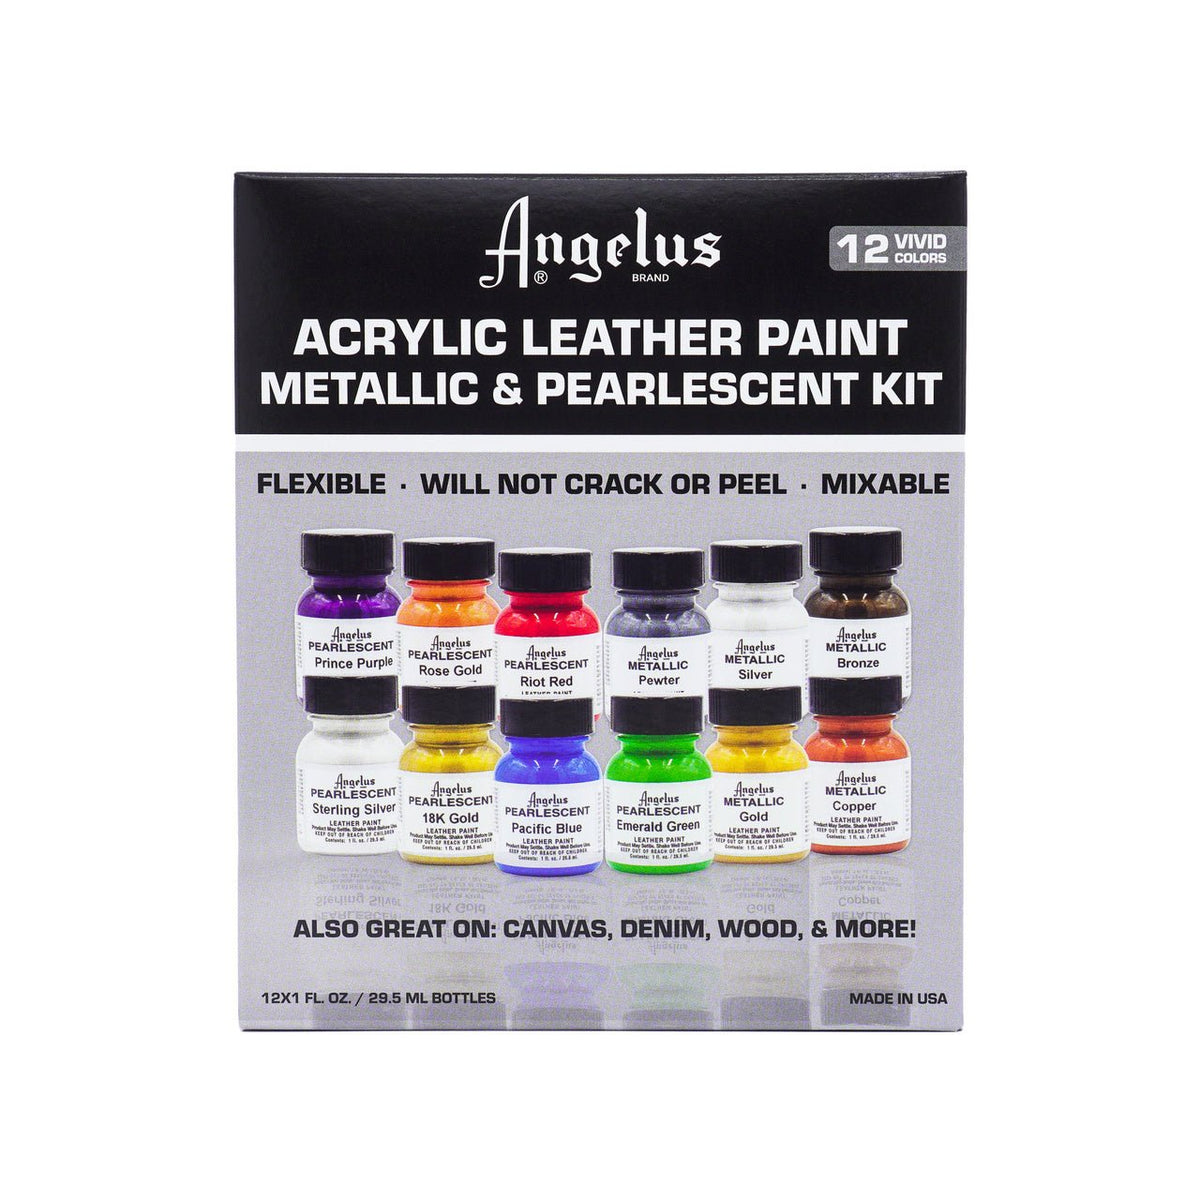 Angelus Acrylic Leather Paint Kit - 1 oz Metallic and Pearlescent - 12 Colors - merriartist.com